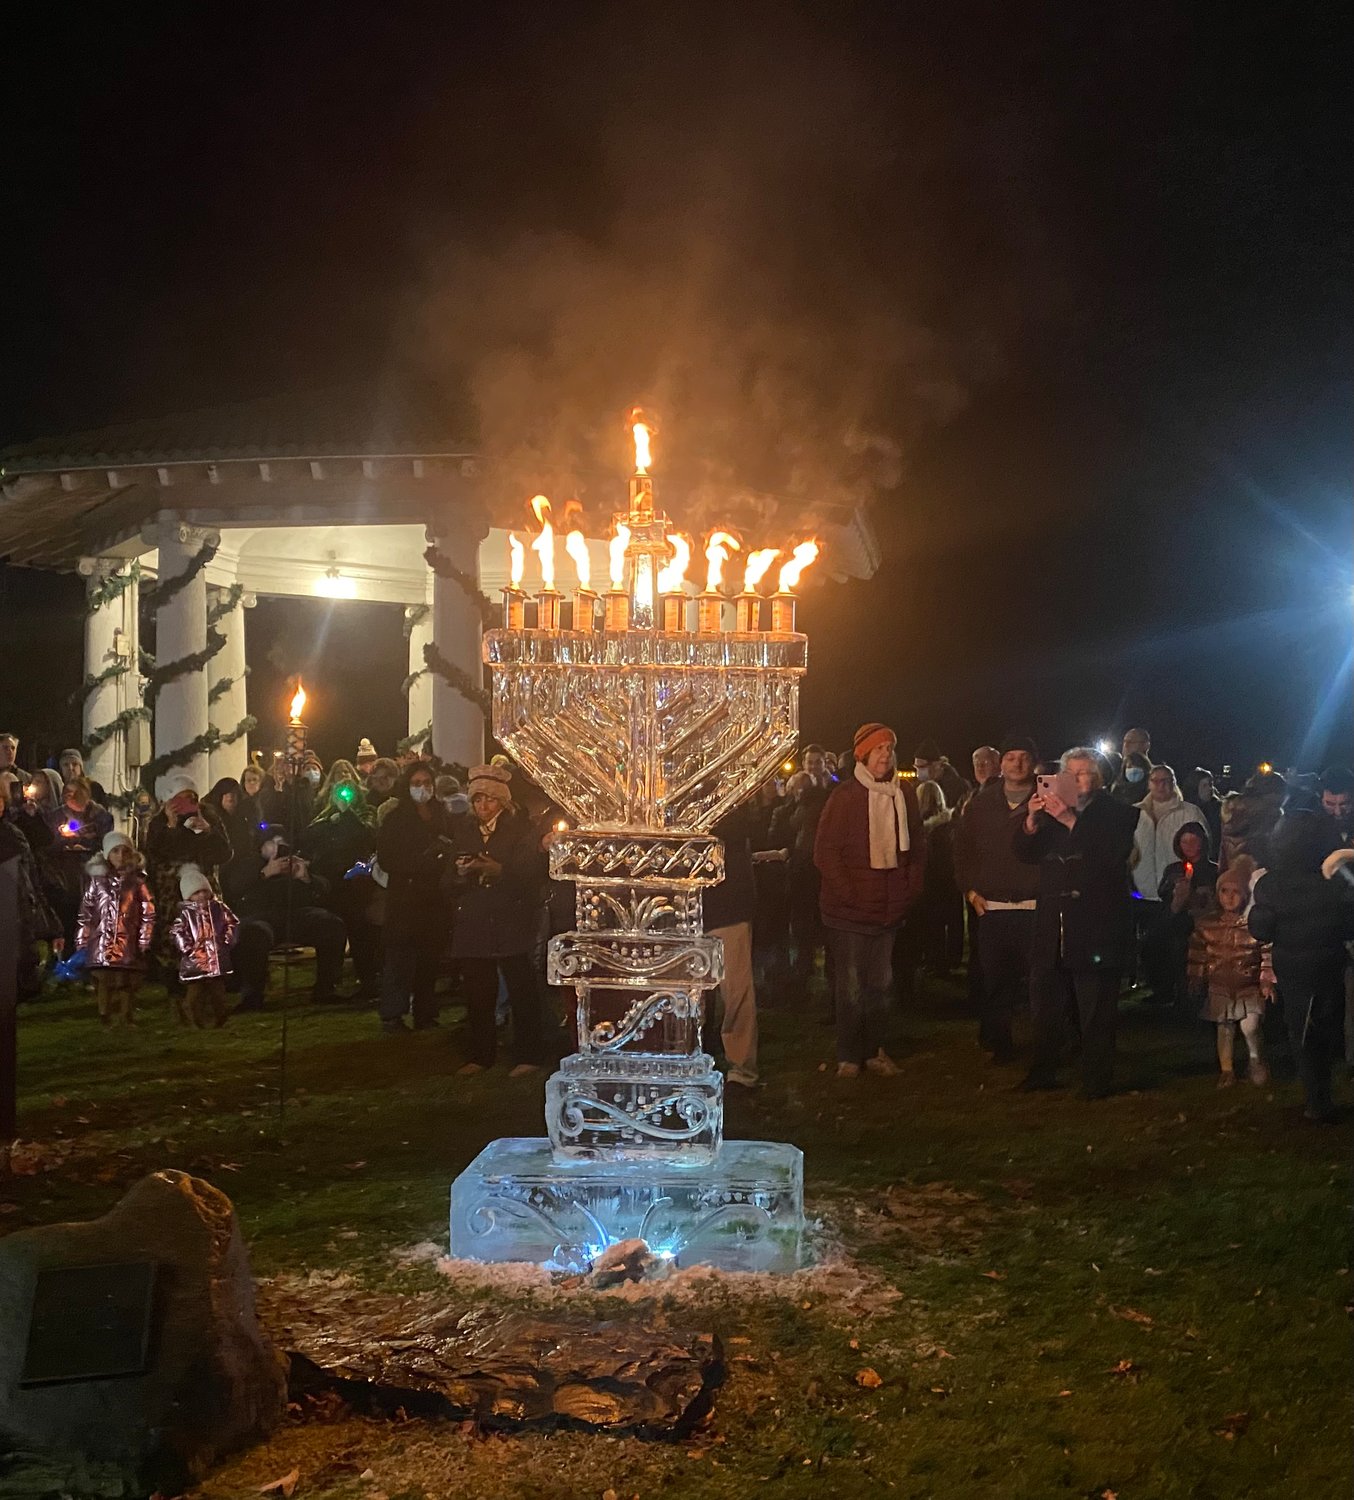 The ice carver works to create the 7-foot-tall menorah sculpture.